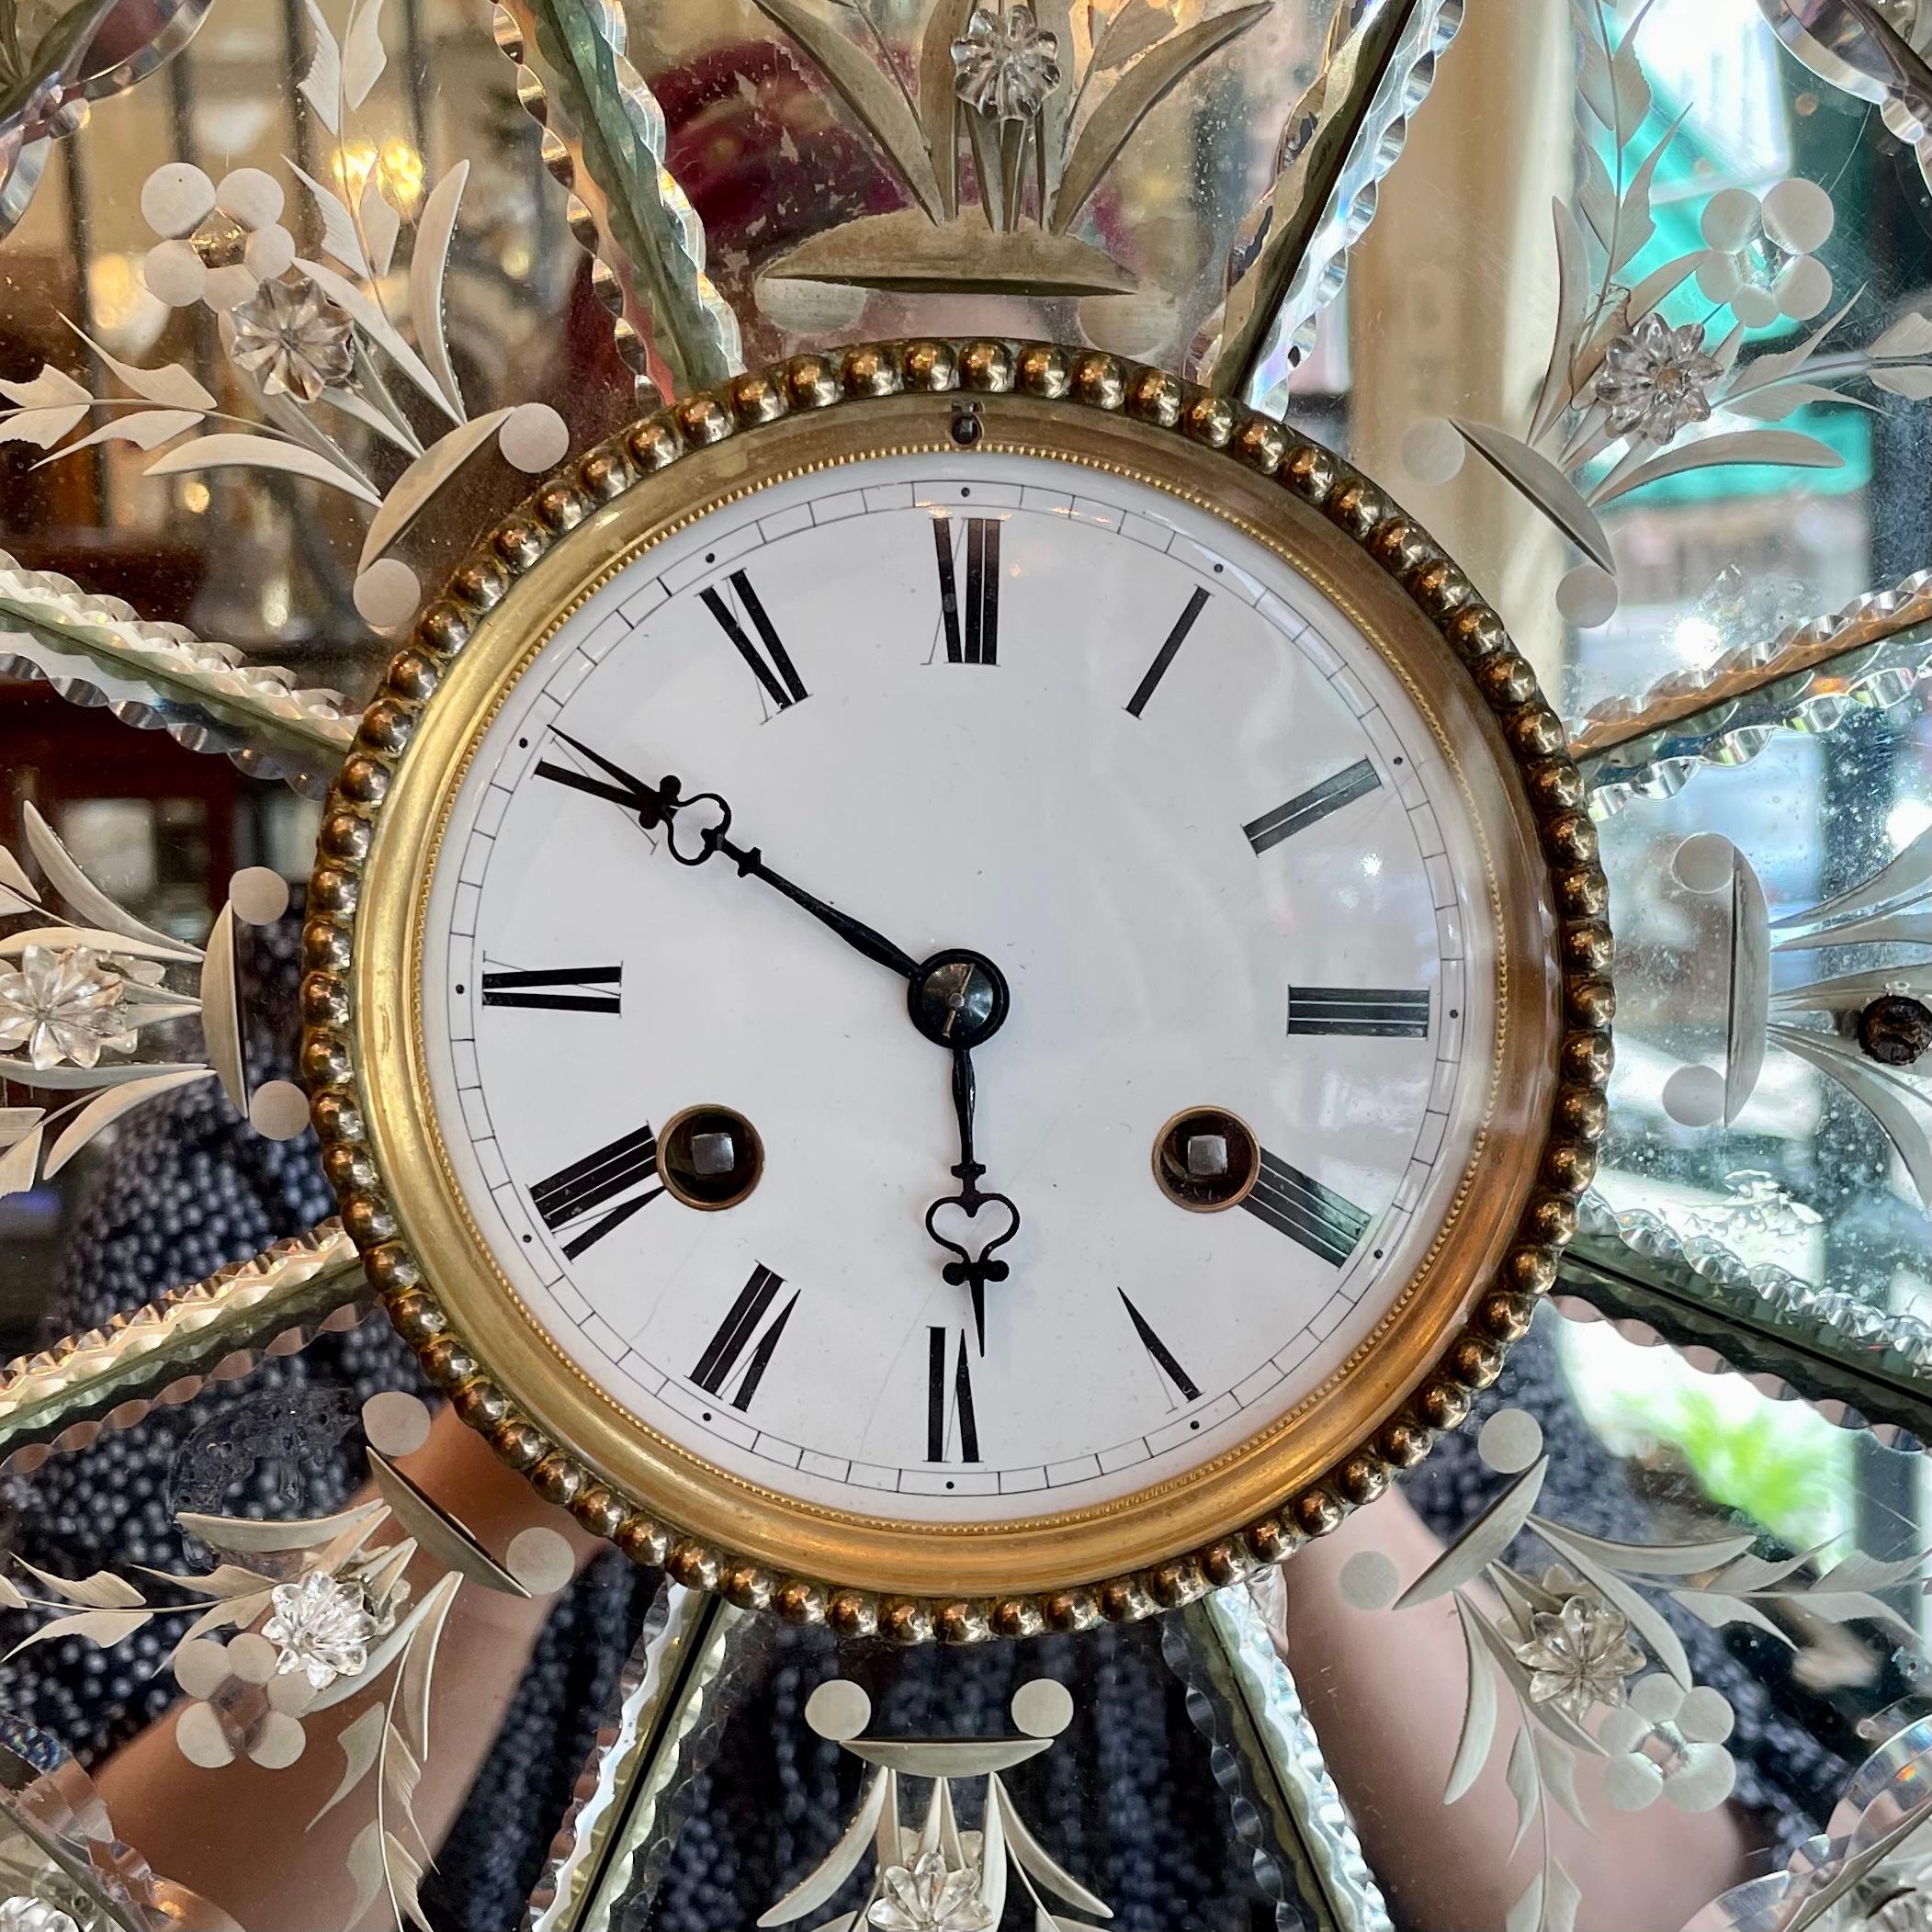 American Antique Mirrored & Diamond-Etched Wall Clock, circa 1900-1910 For Sale